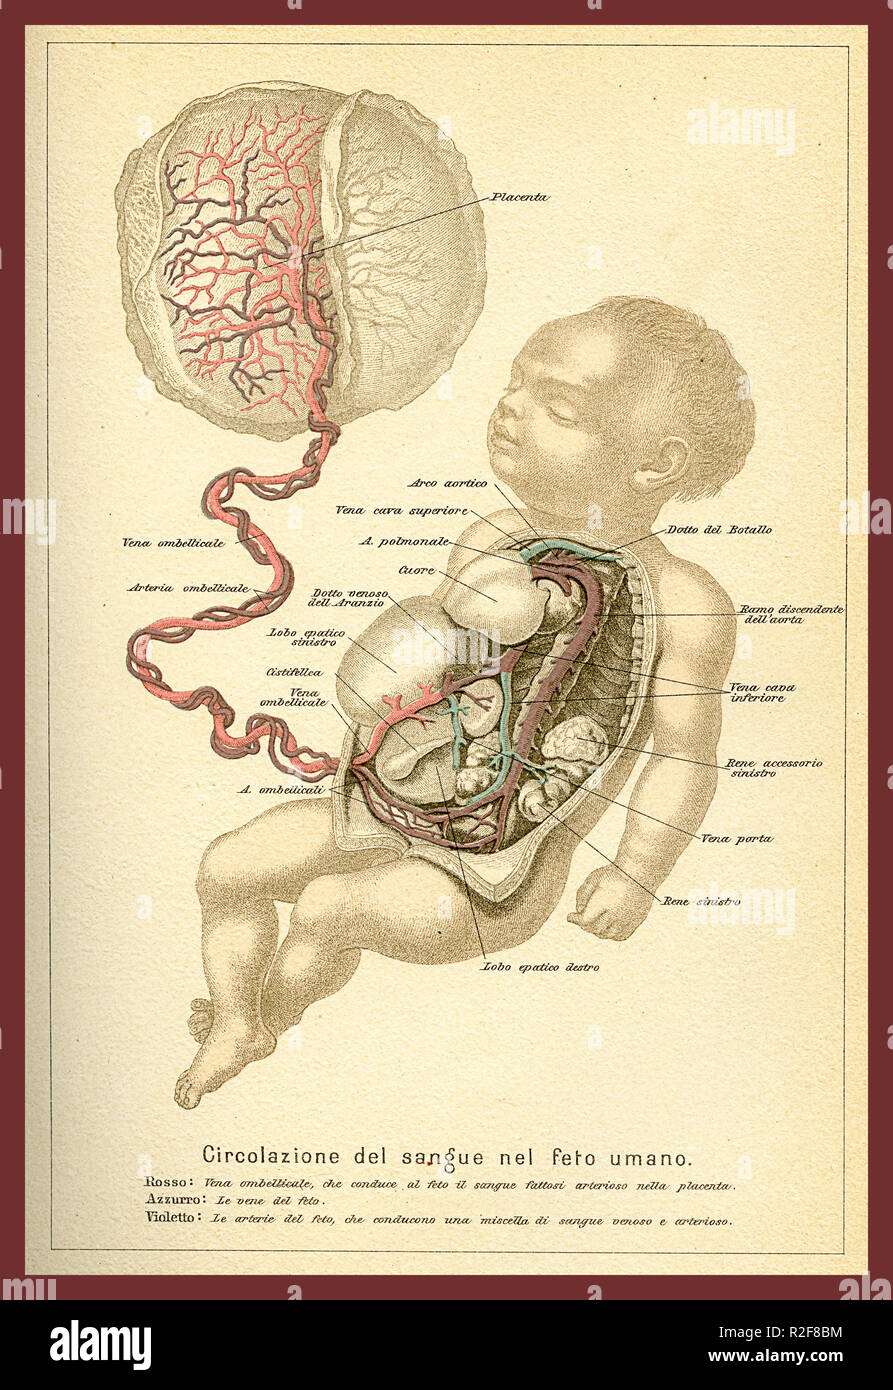 Vintage color table of anatomy, human fetus blood circulation with Italian anatomical descriptions Stock Photo